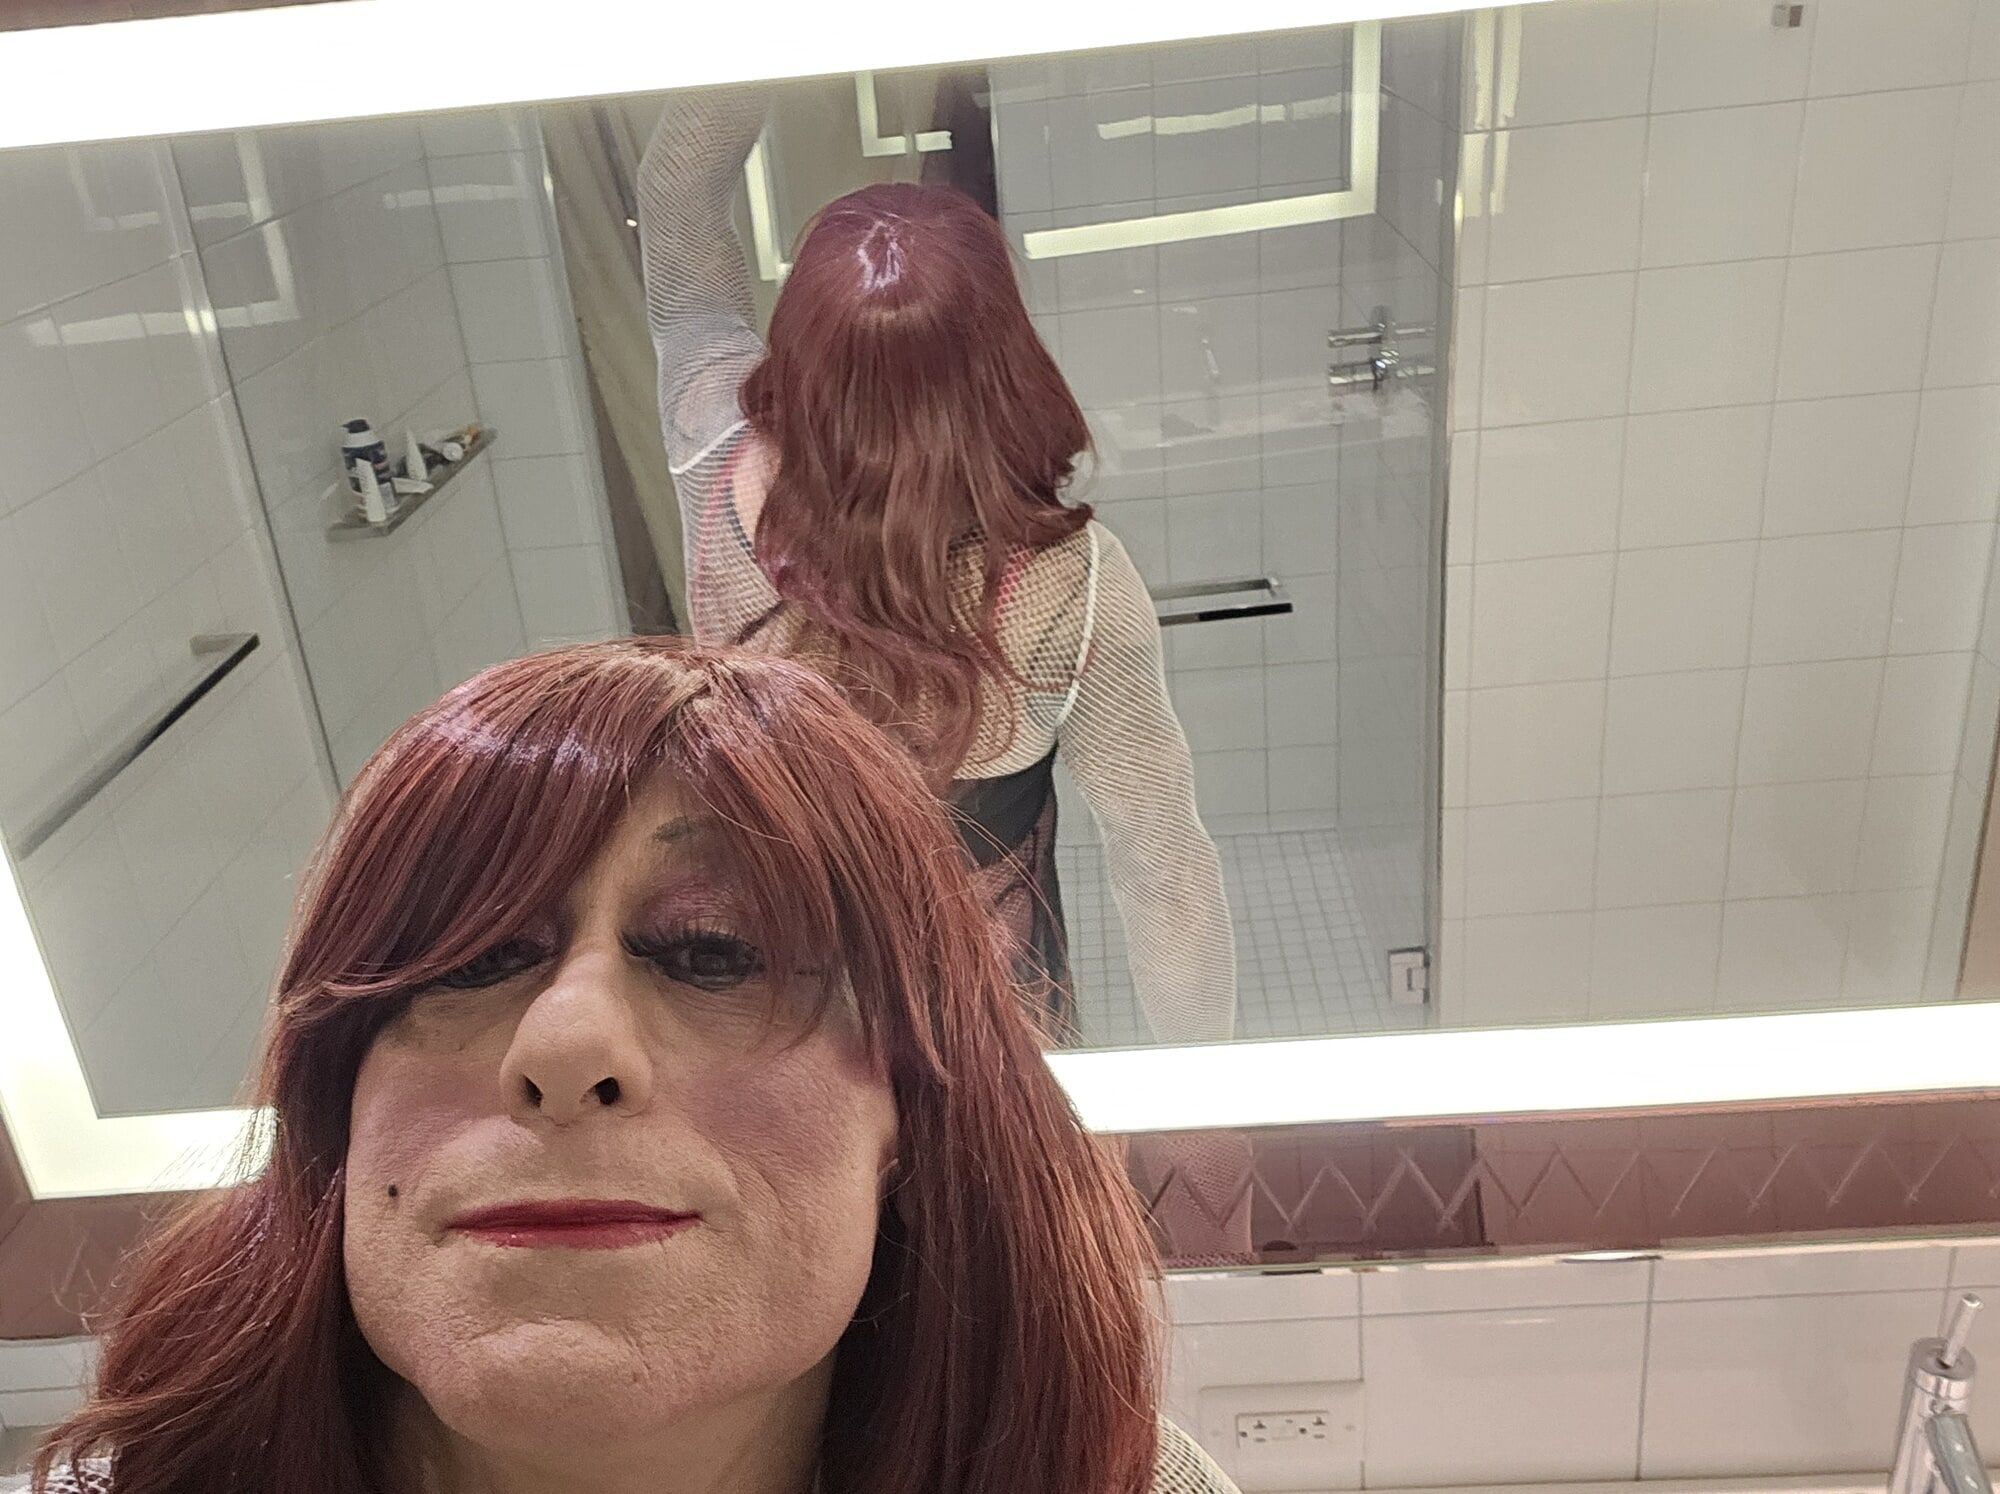 Being all pretty sissy crossdresser with a new look #2